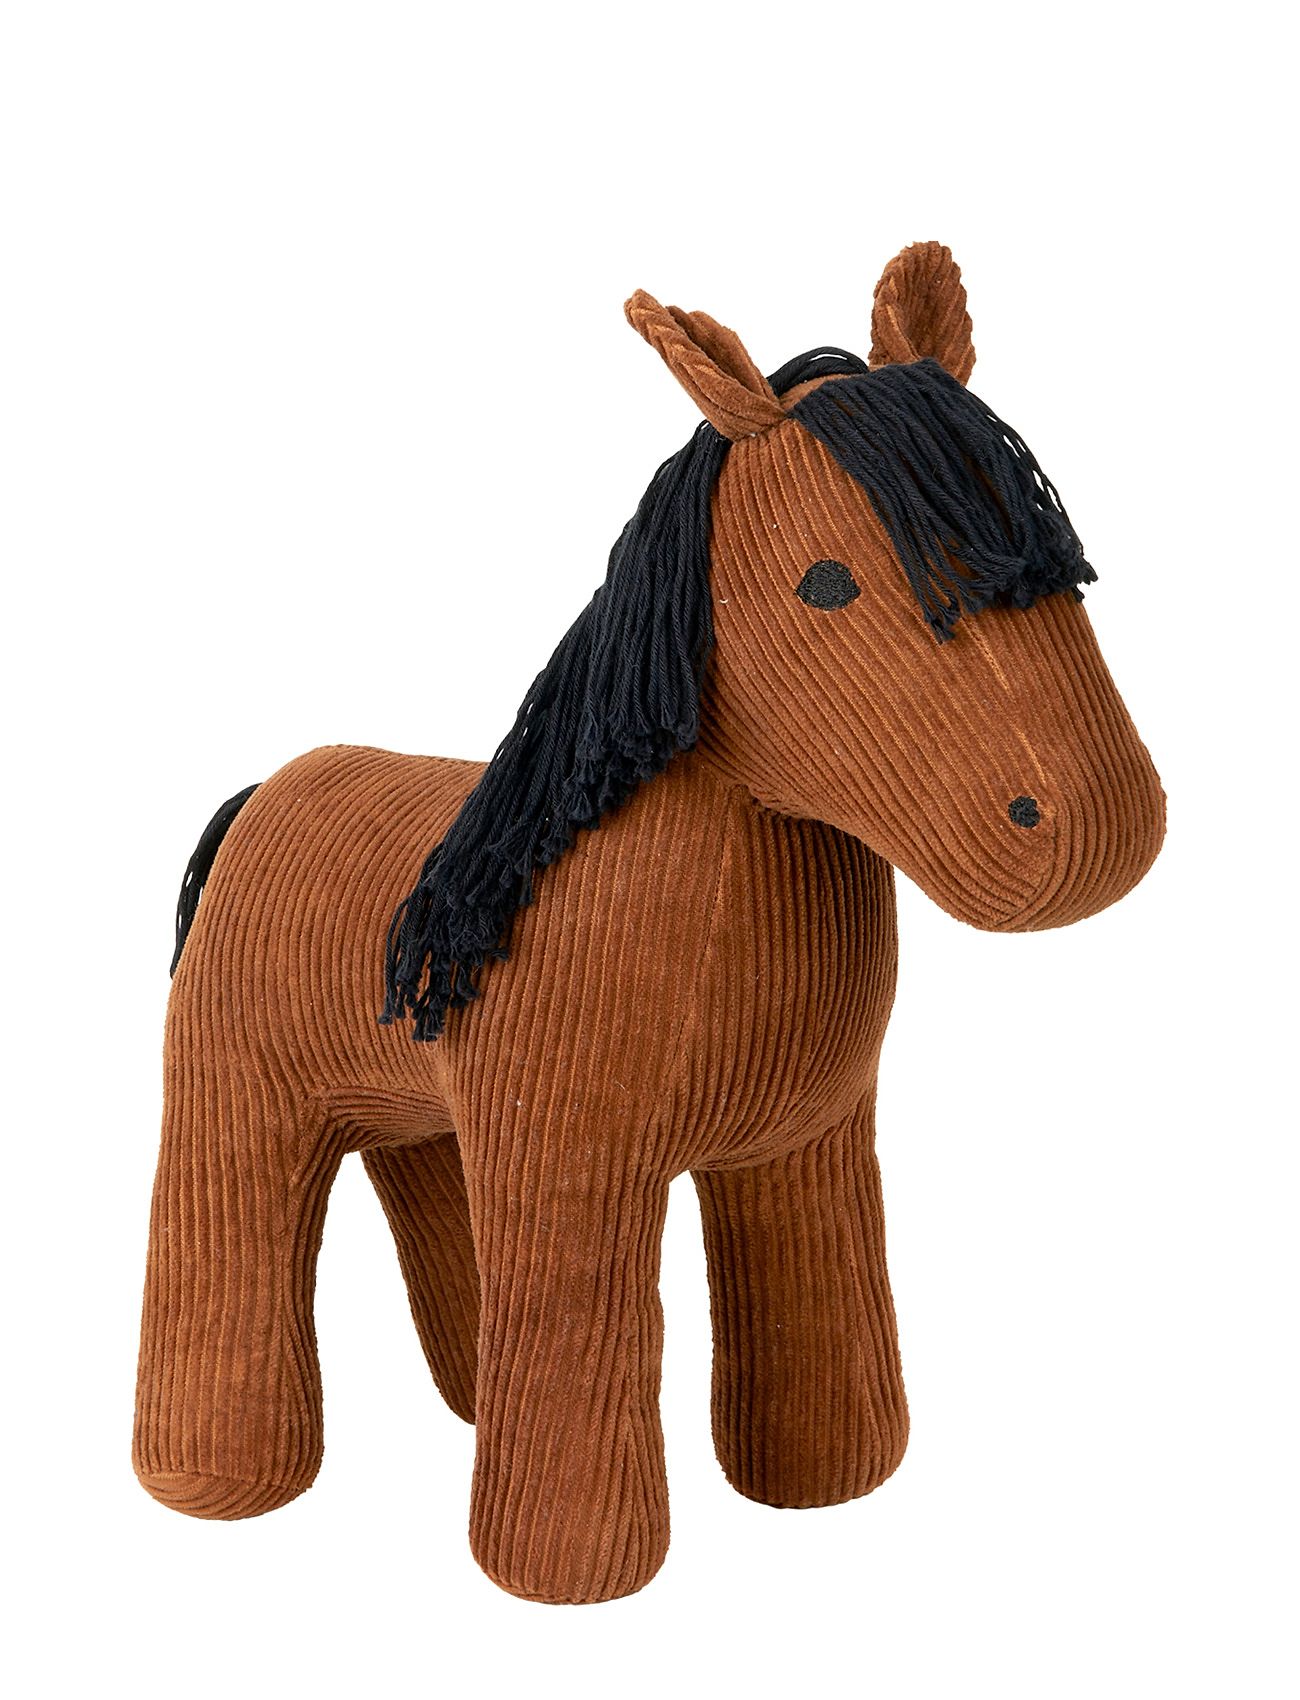 Fab Friends - Horse Hector Toys Soft Toys Stuffed Animals Brown Fabelab